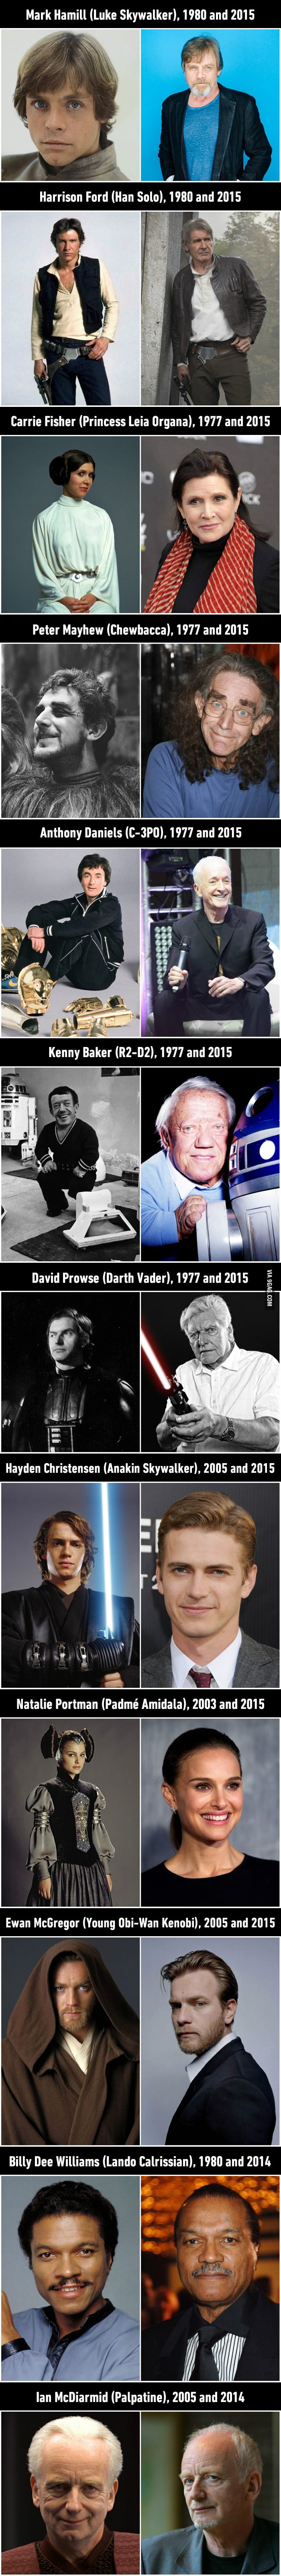 Star Wars Characters That We Love, Then and Now